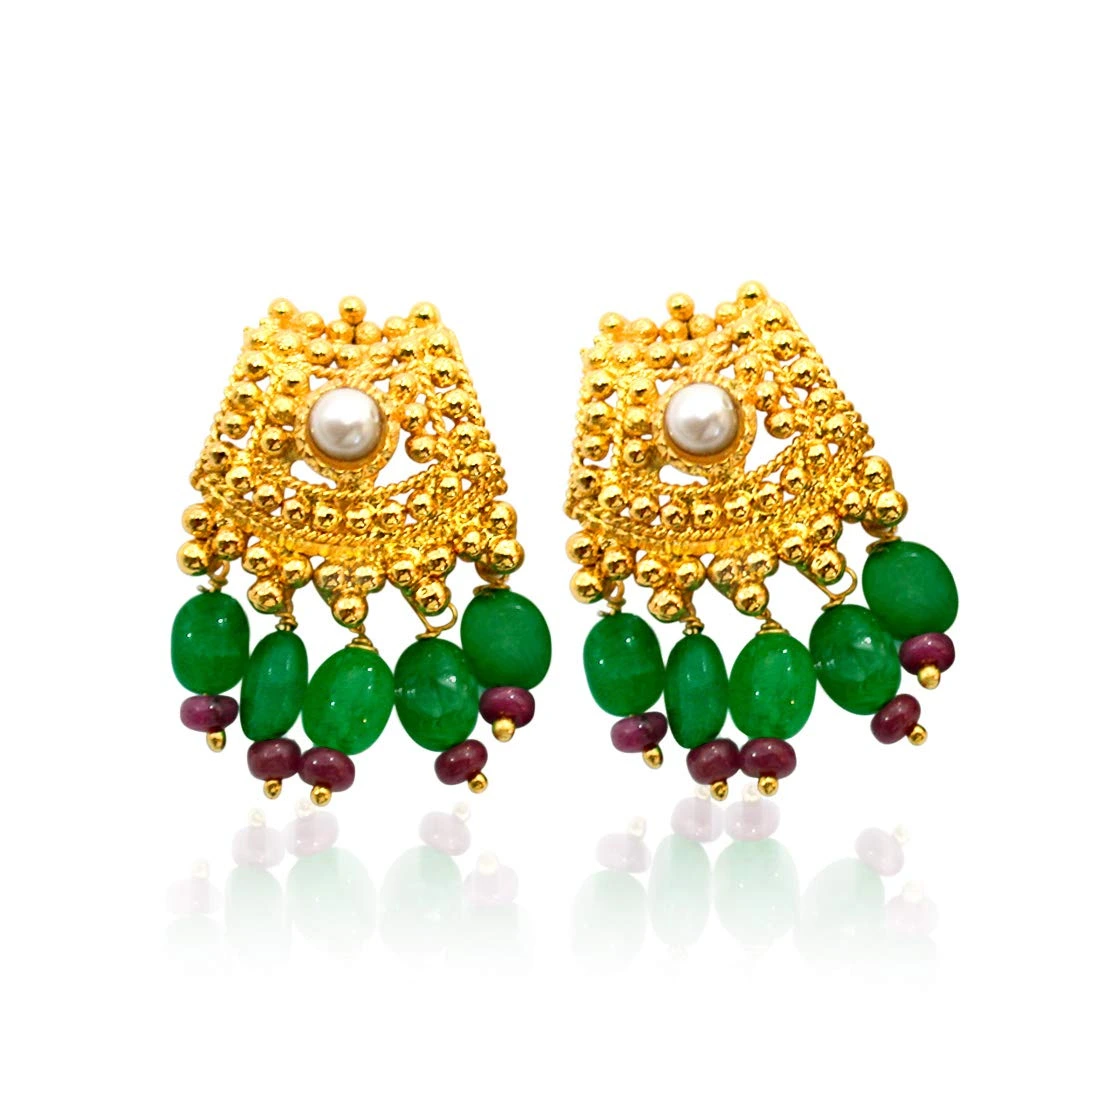 Real Freshwater Pearl, Ruby, Emerald & Gold Plated Earrings for Women (SE107)